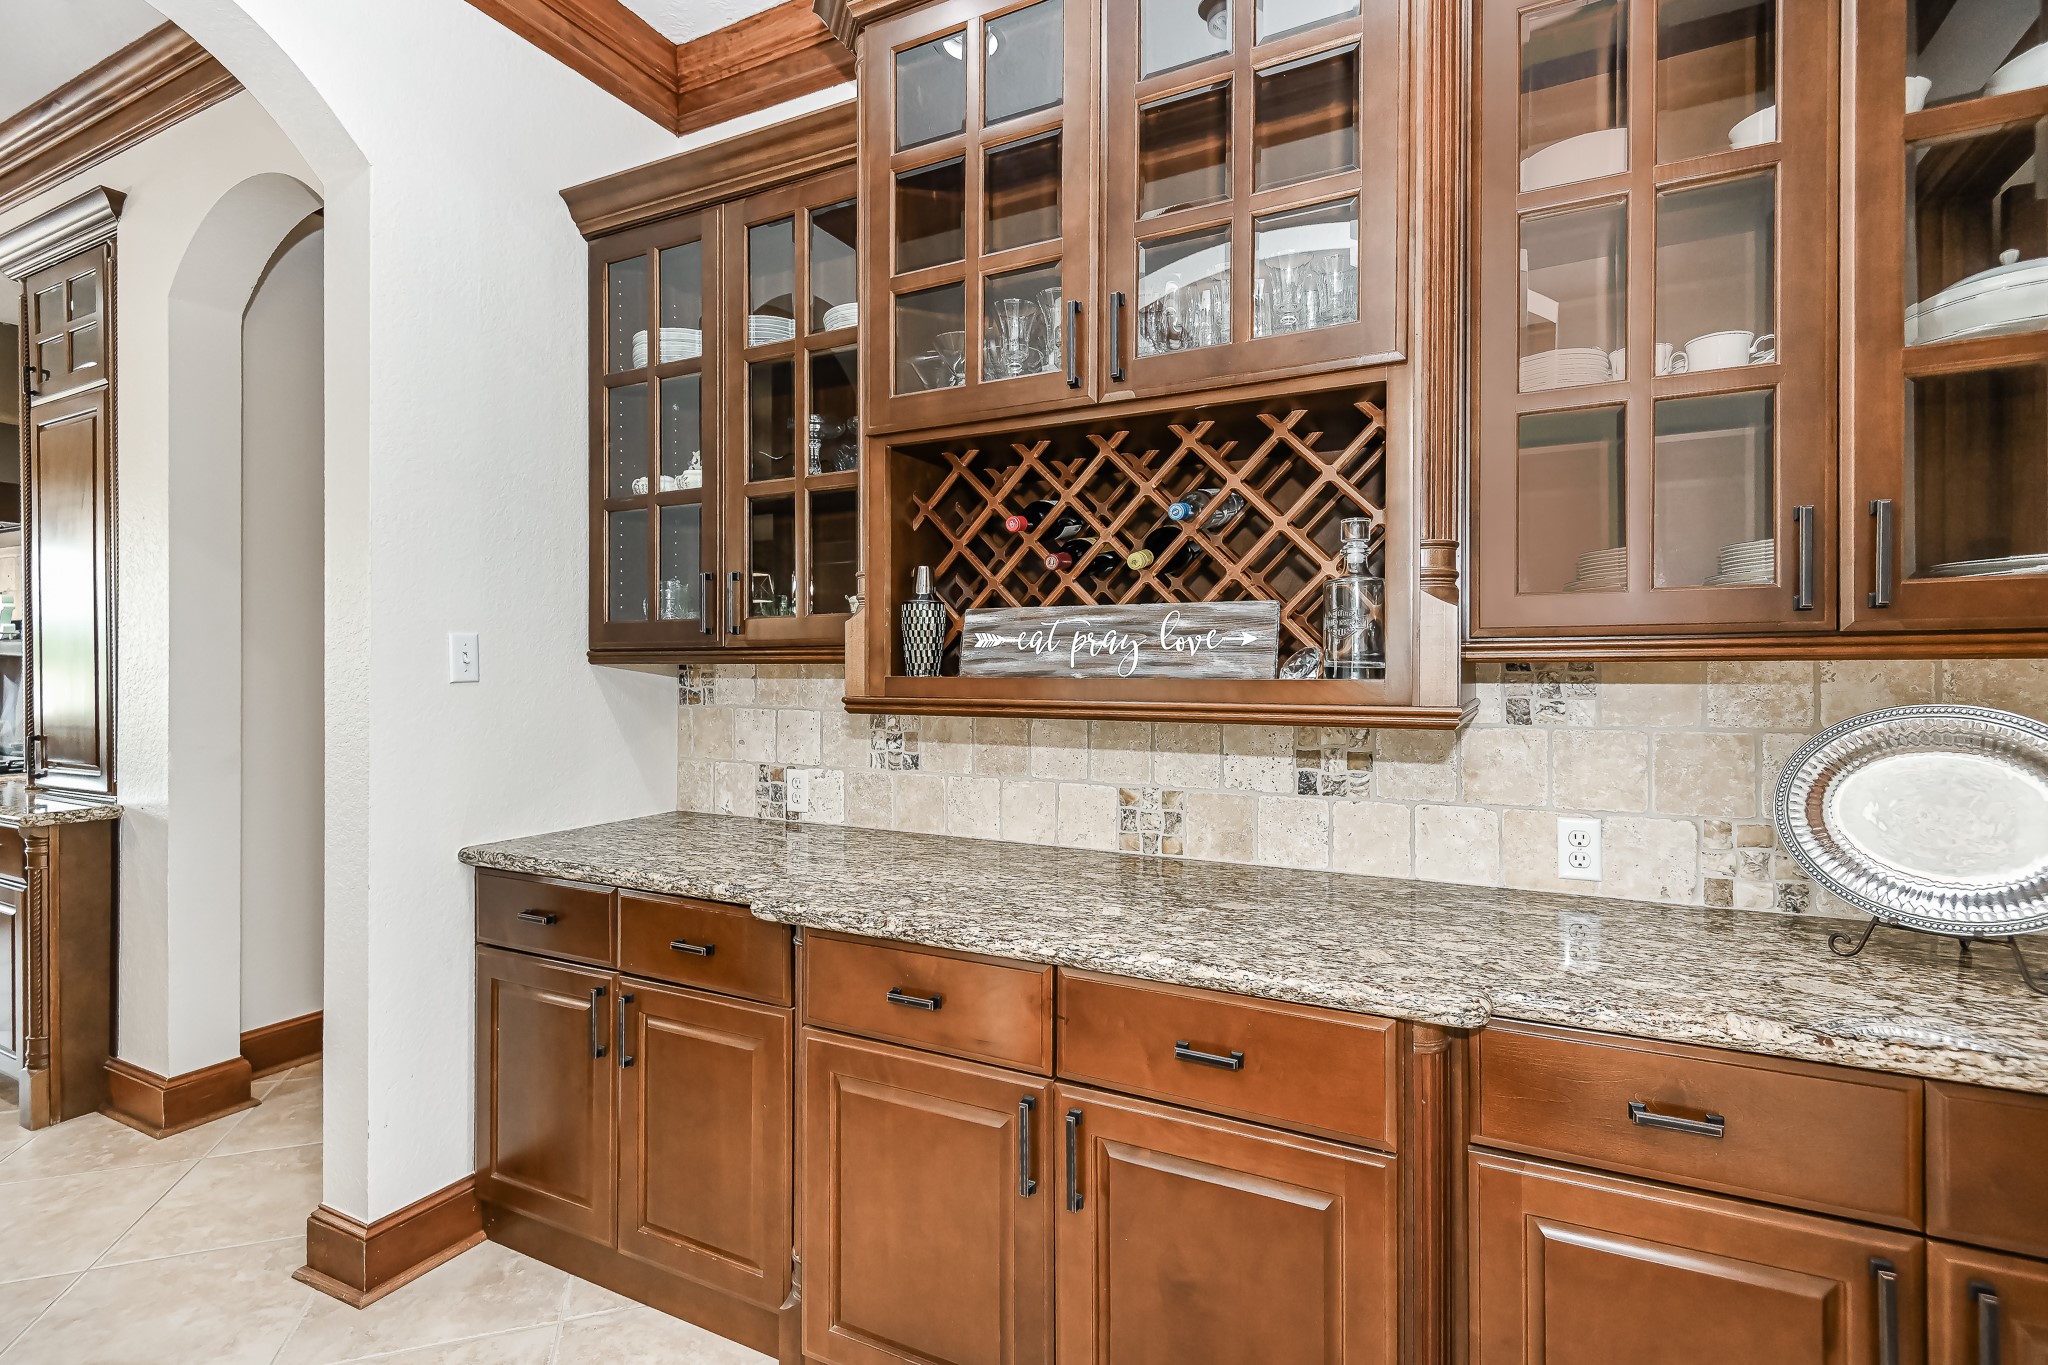 Butler's pantry with glass cabinet doors and wine storage.